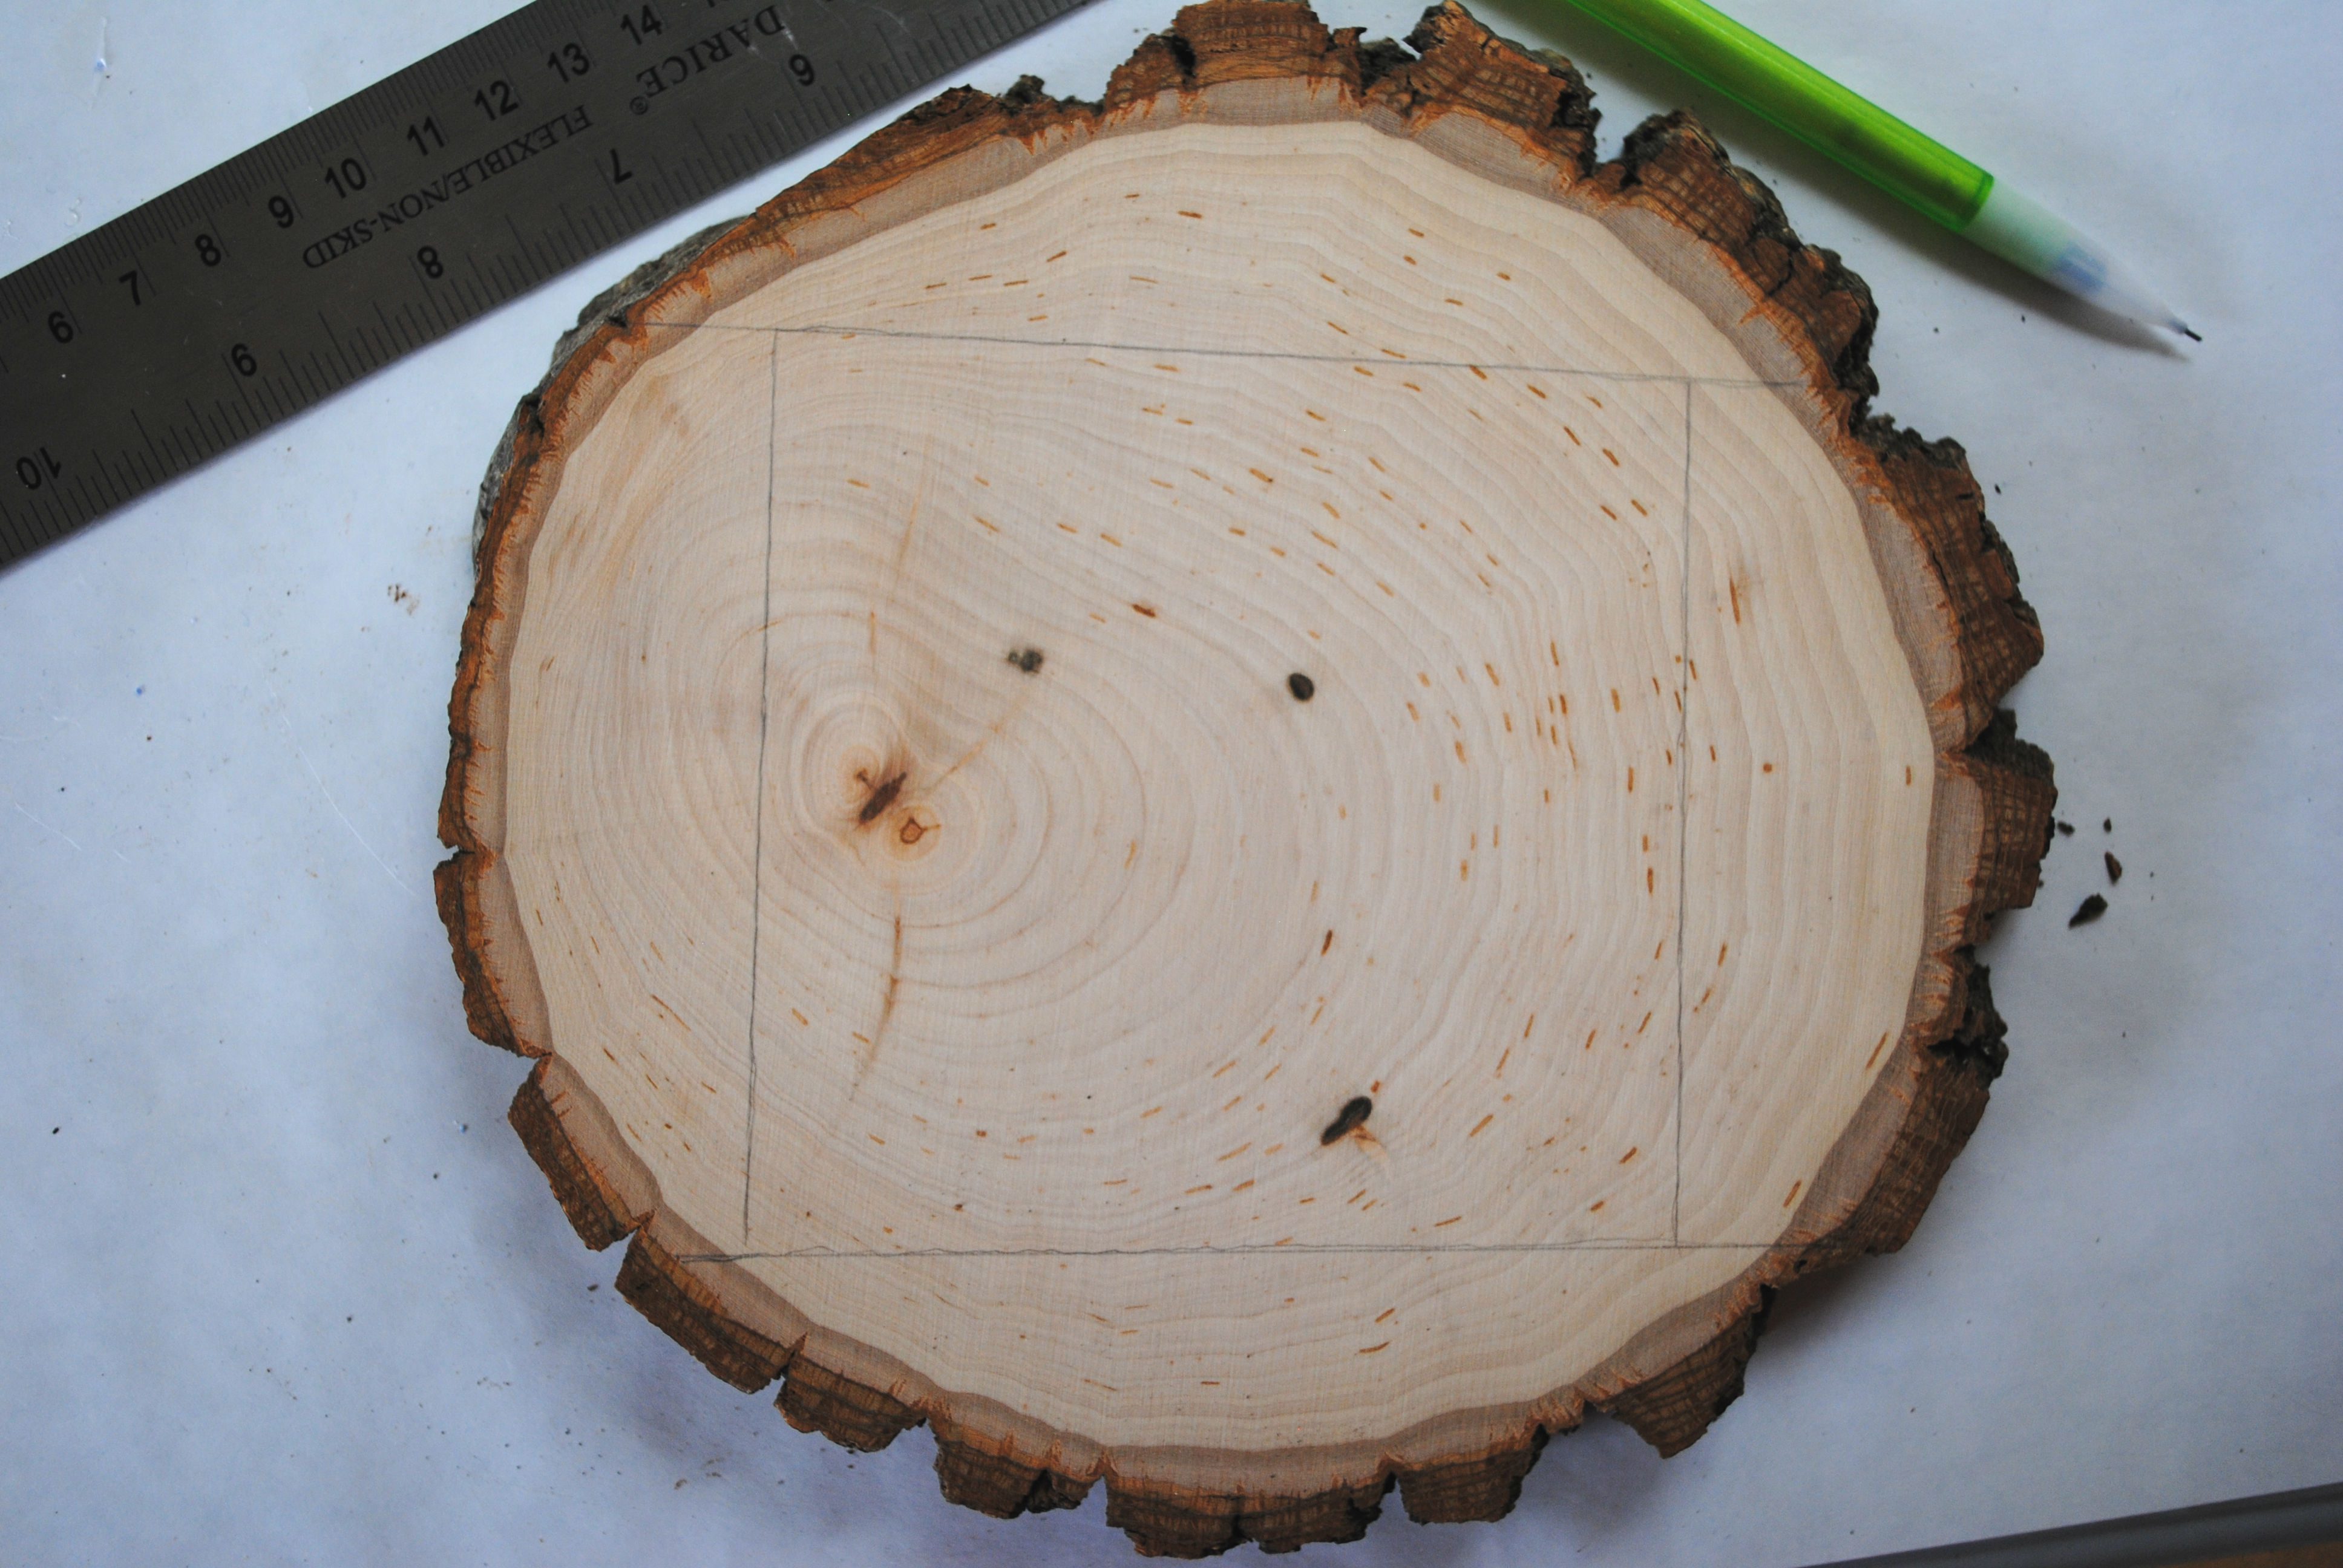 slice of wood with measurements for cutting drawn on and a ruler and a pencil